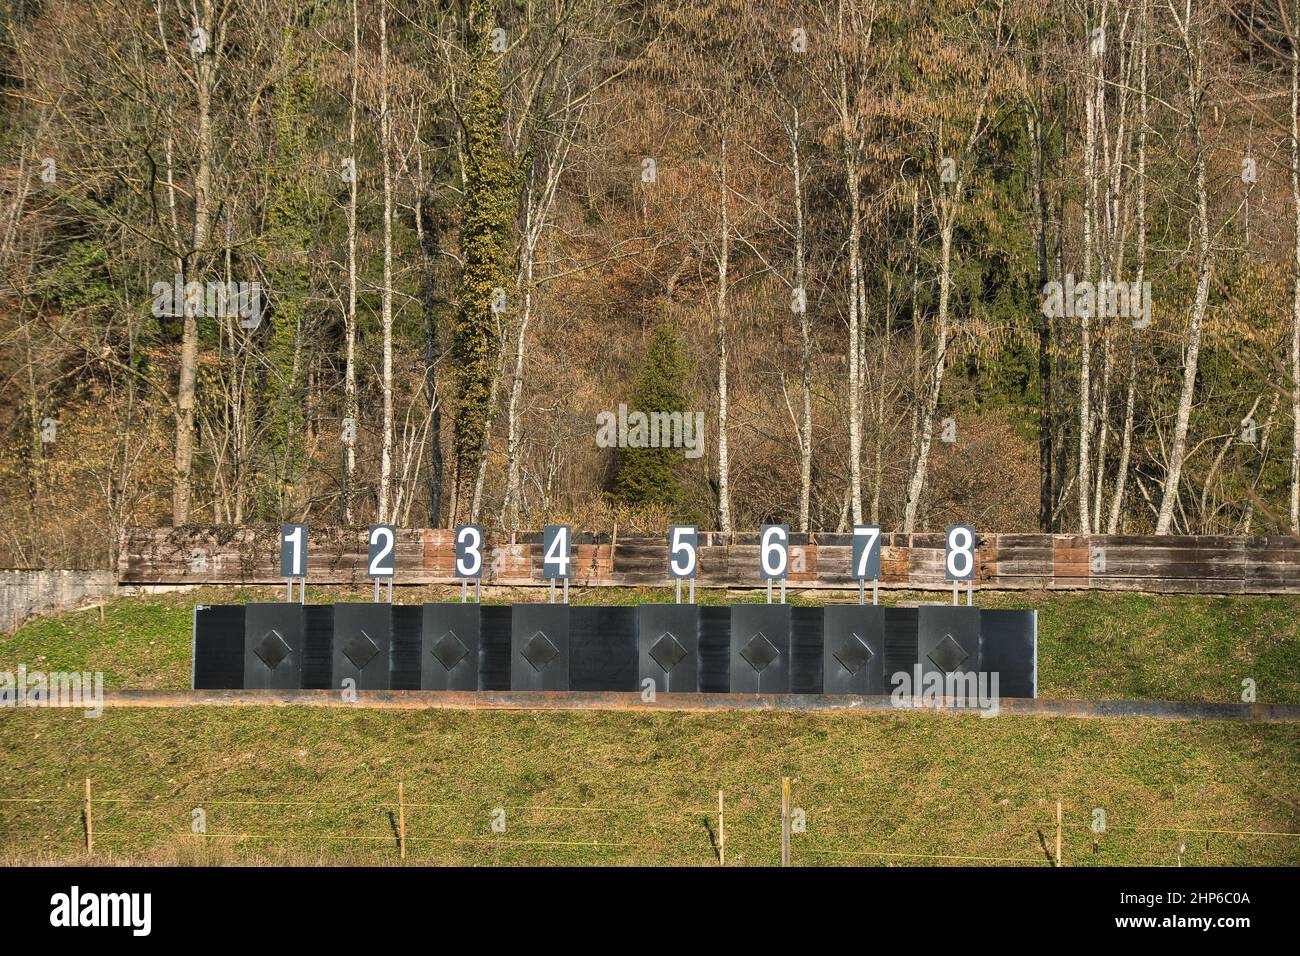 Plates of numbers in the forest in Malters, Switzerland Stock Photo